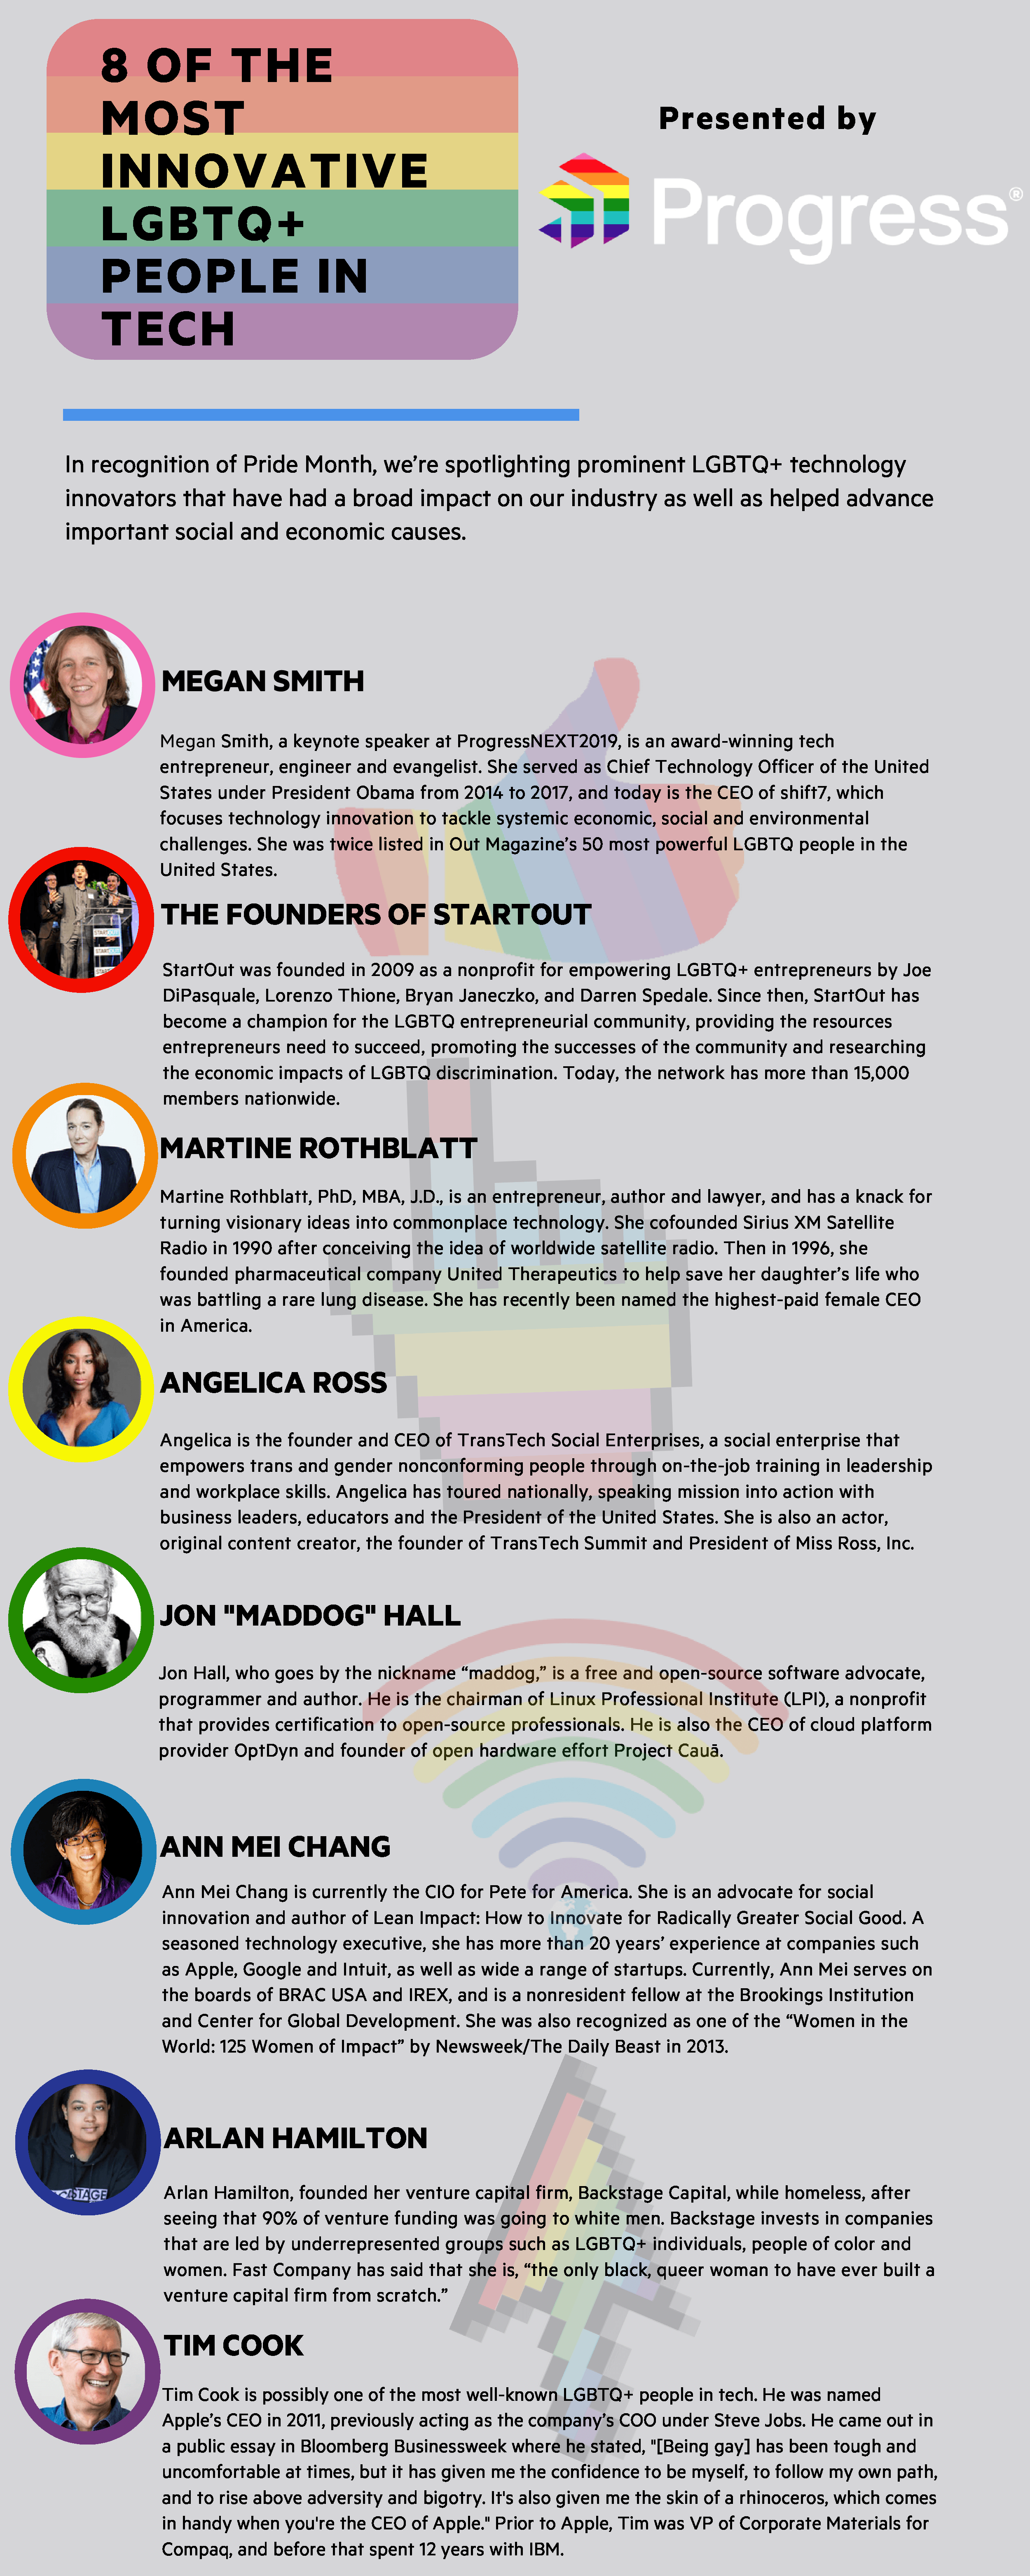 8 of the Most Innovative LGBTQ+ People in Tech Infographic